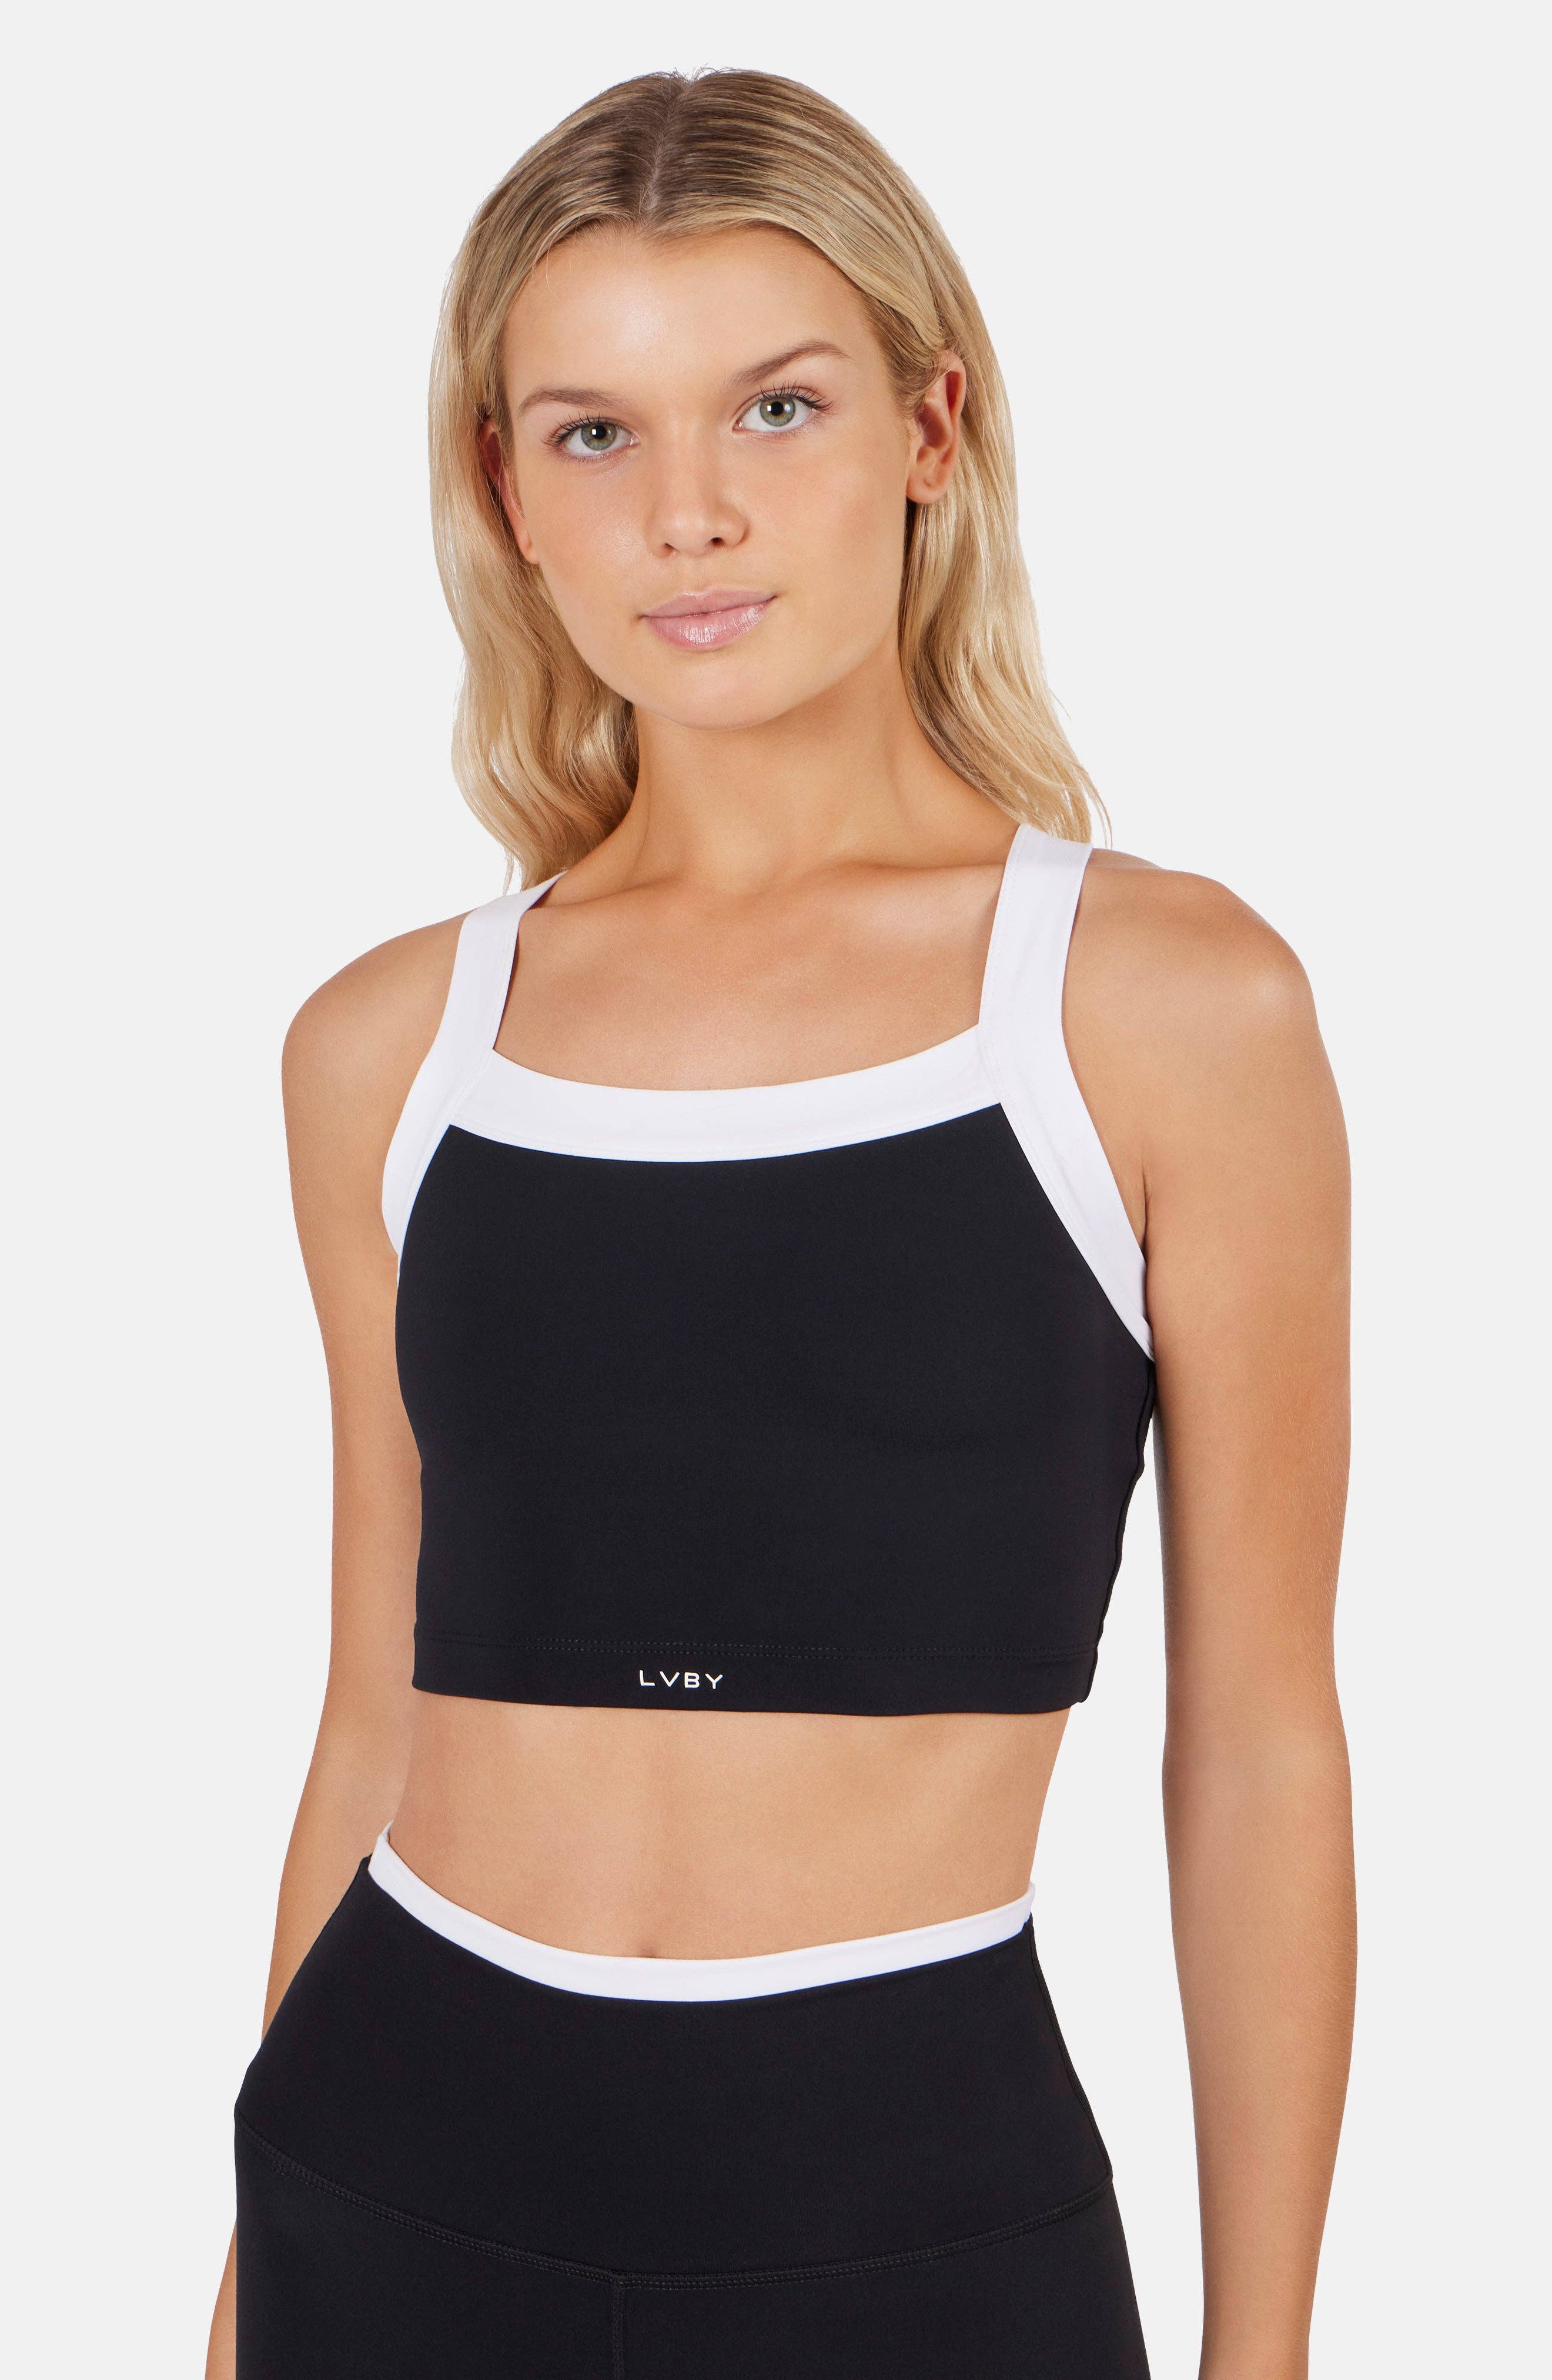 Sports bras and the pursuit of happiness